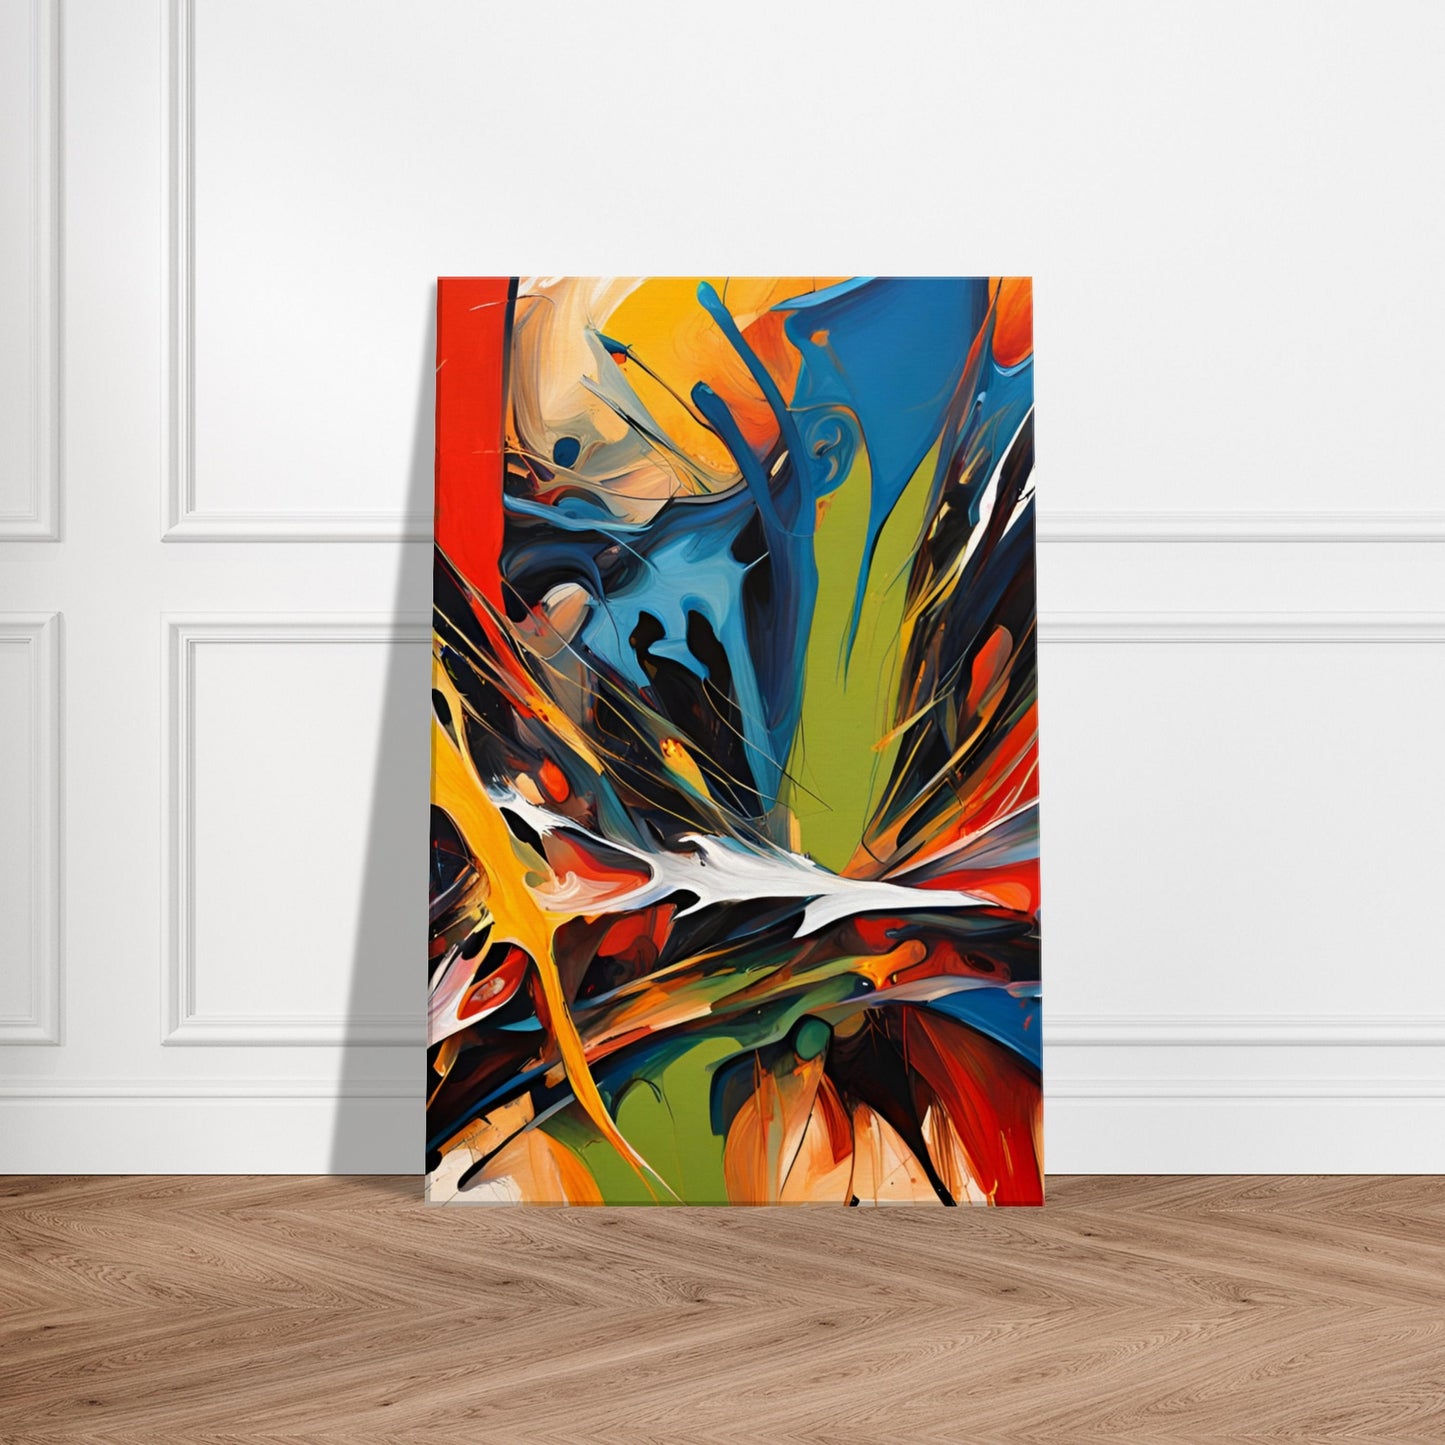 “Guided Amidst the Chaos” Composition B Canvas Art